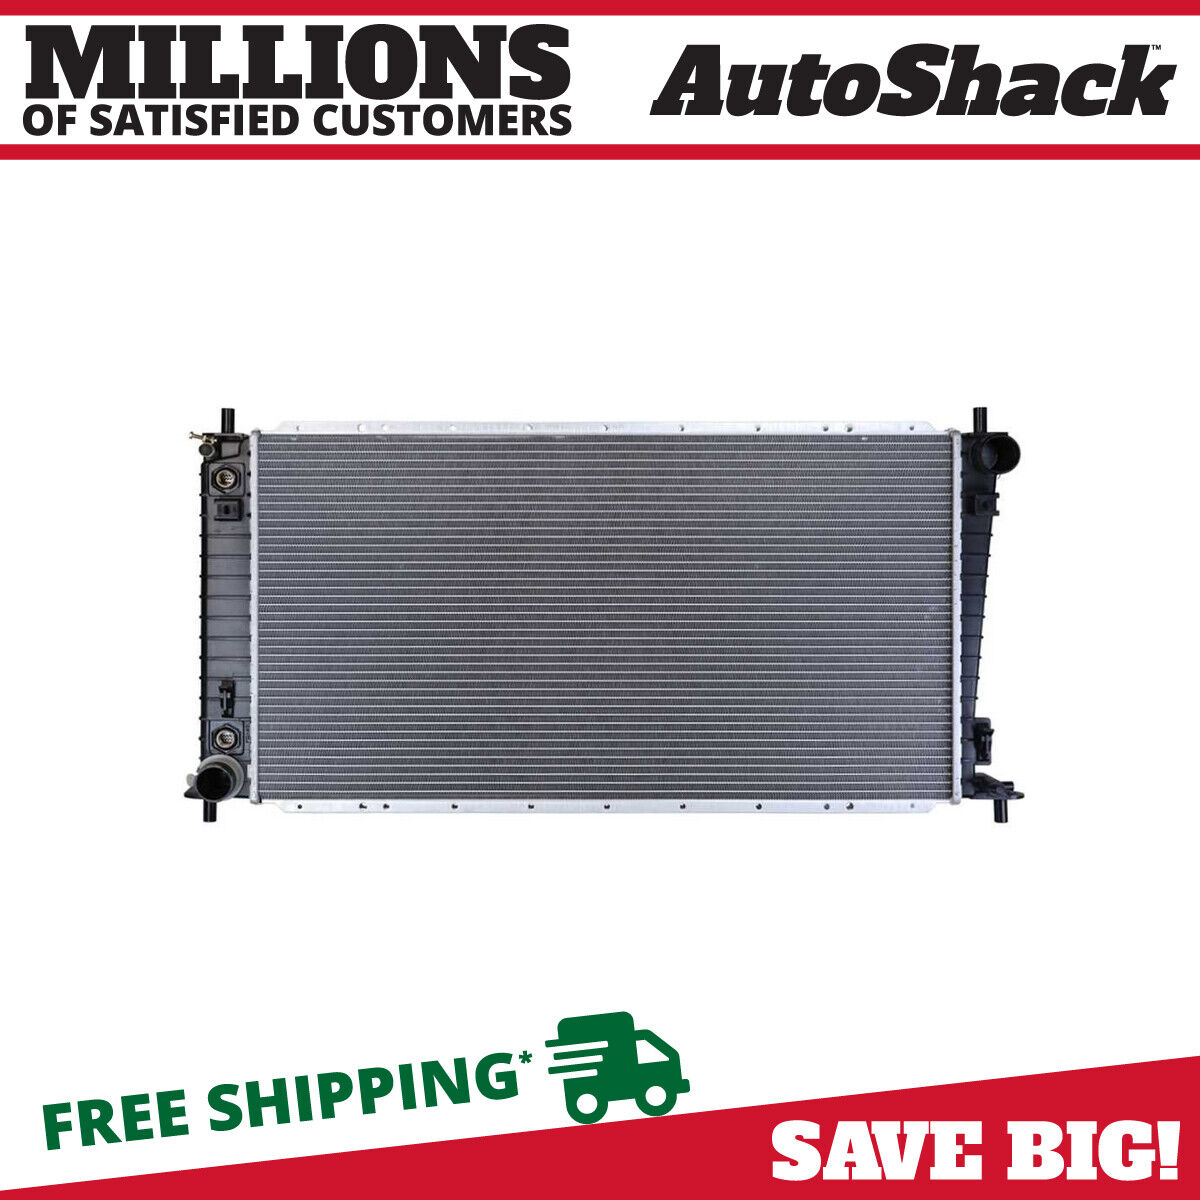 Radiator for Ford F-150 F-250 Super Duty F-350 Super Duty Expedition 1999 F-250